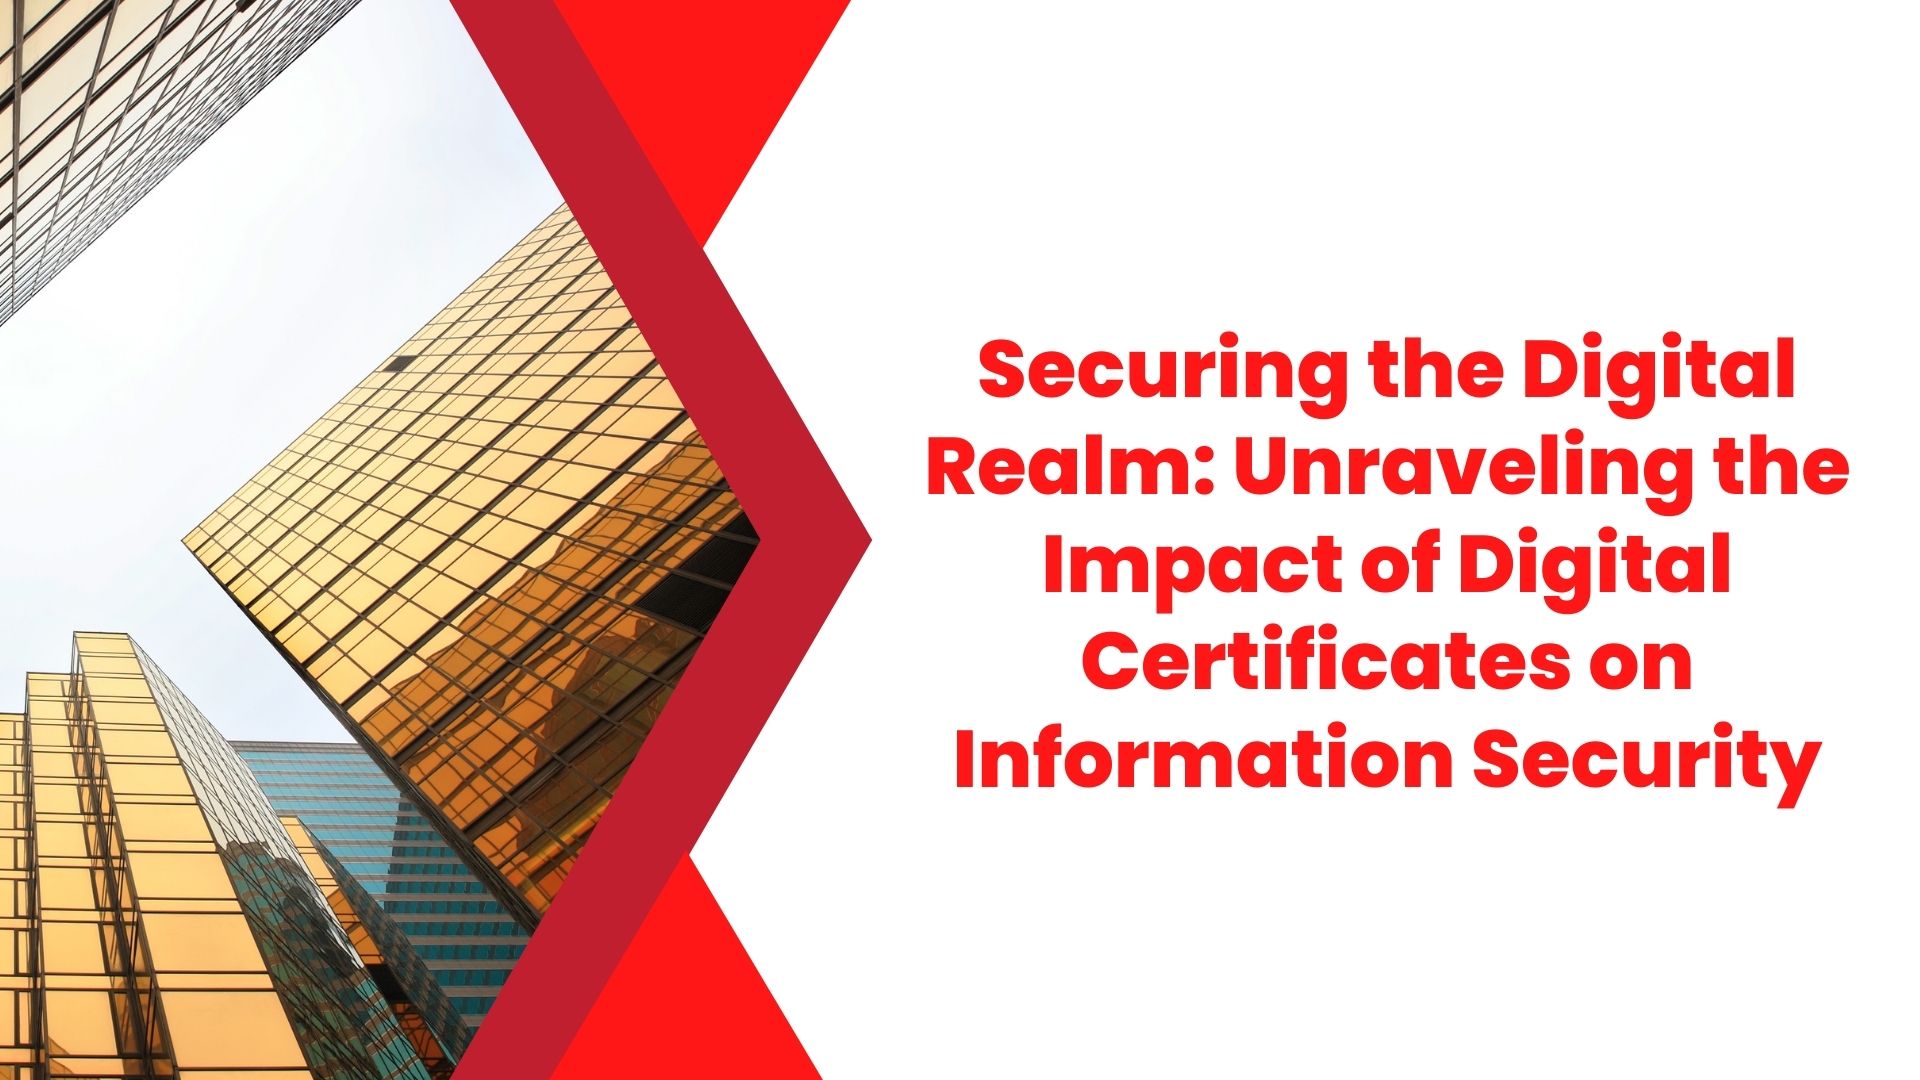 Securing the Digital Realm: Unraveling the Impact of Digital Certificates on Information Security